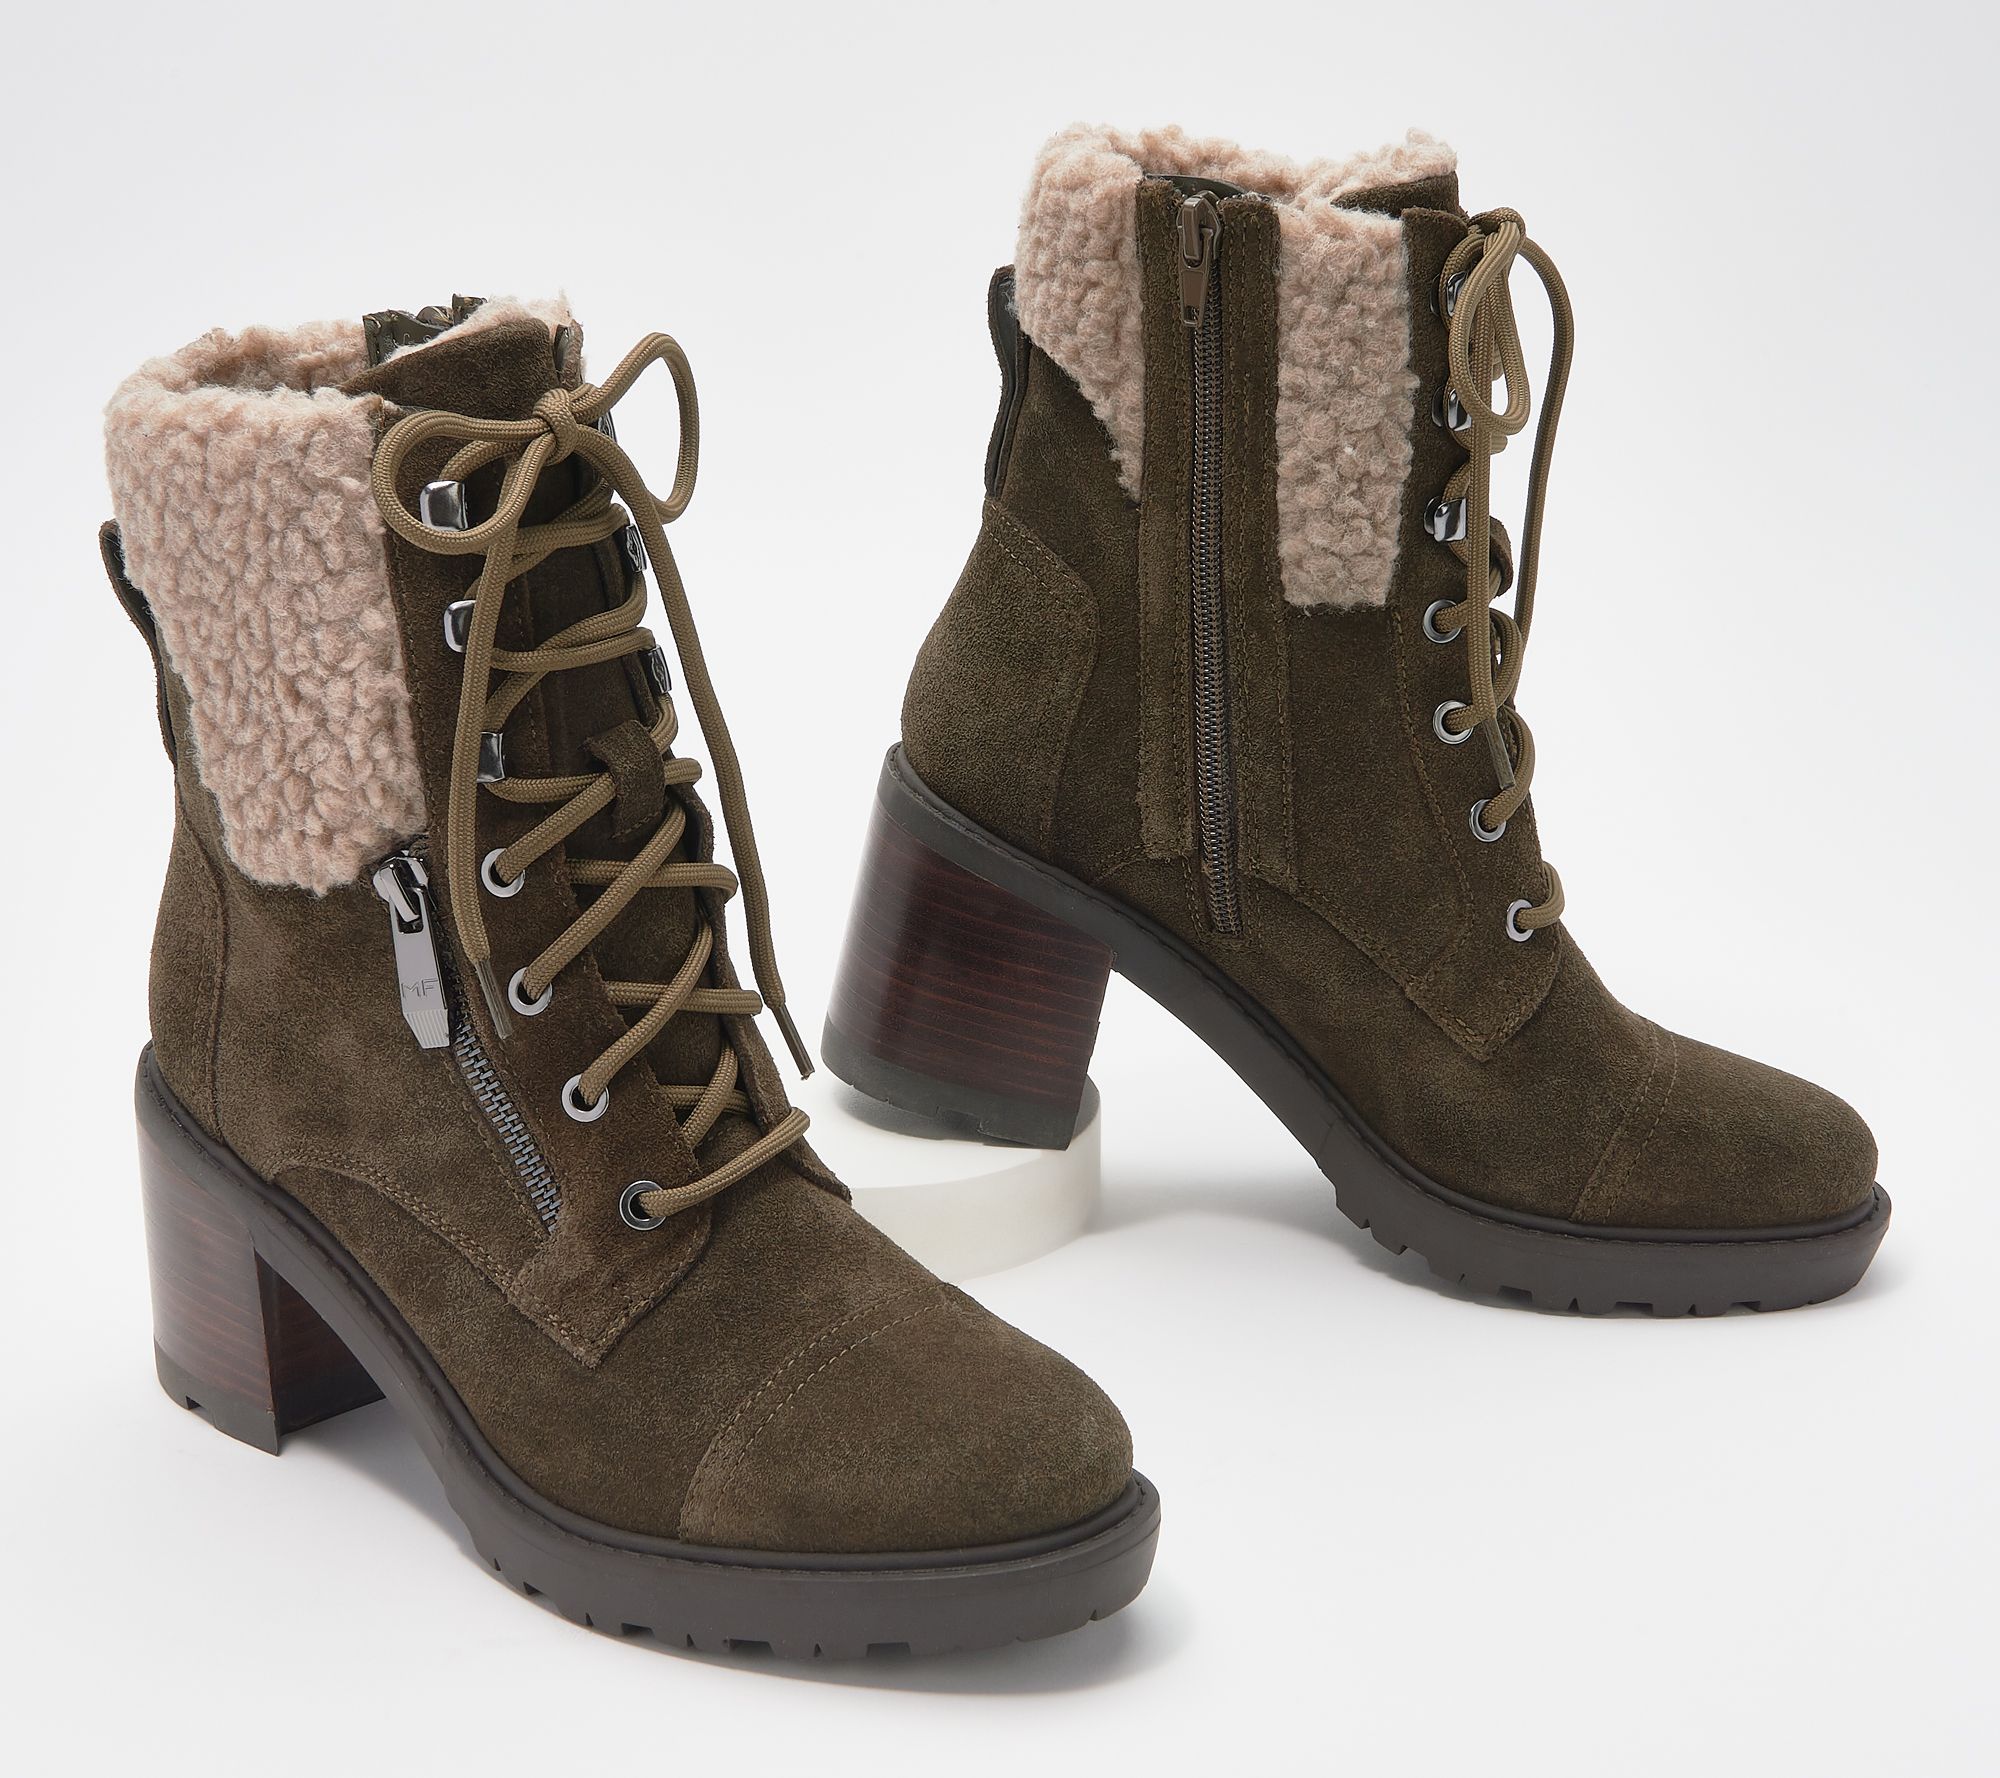 Marc Fisher Lace Up Heeled Booties W Shearling Lansly Qvc Com